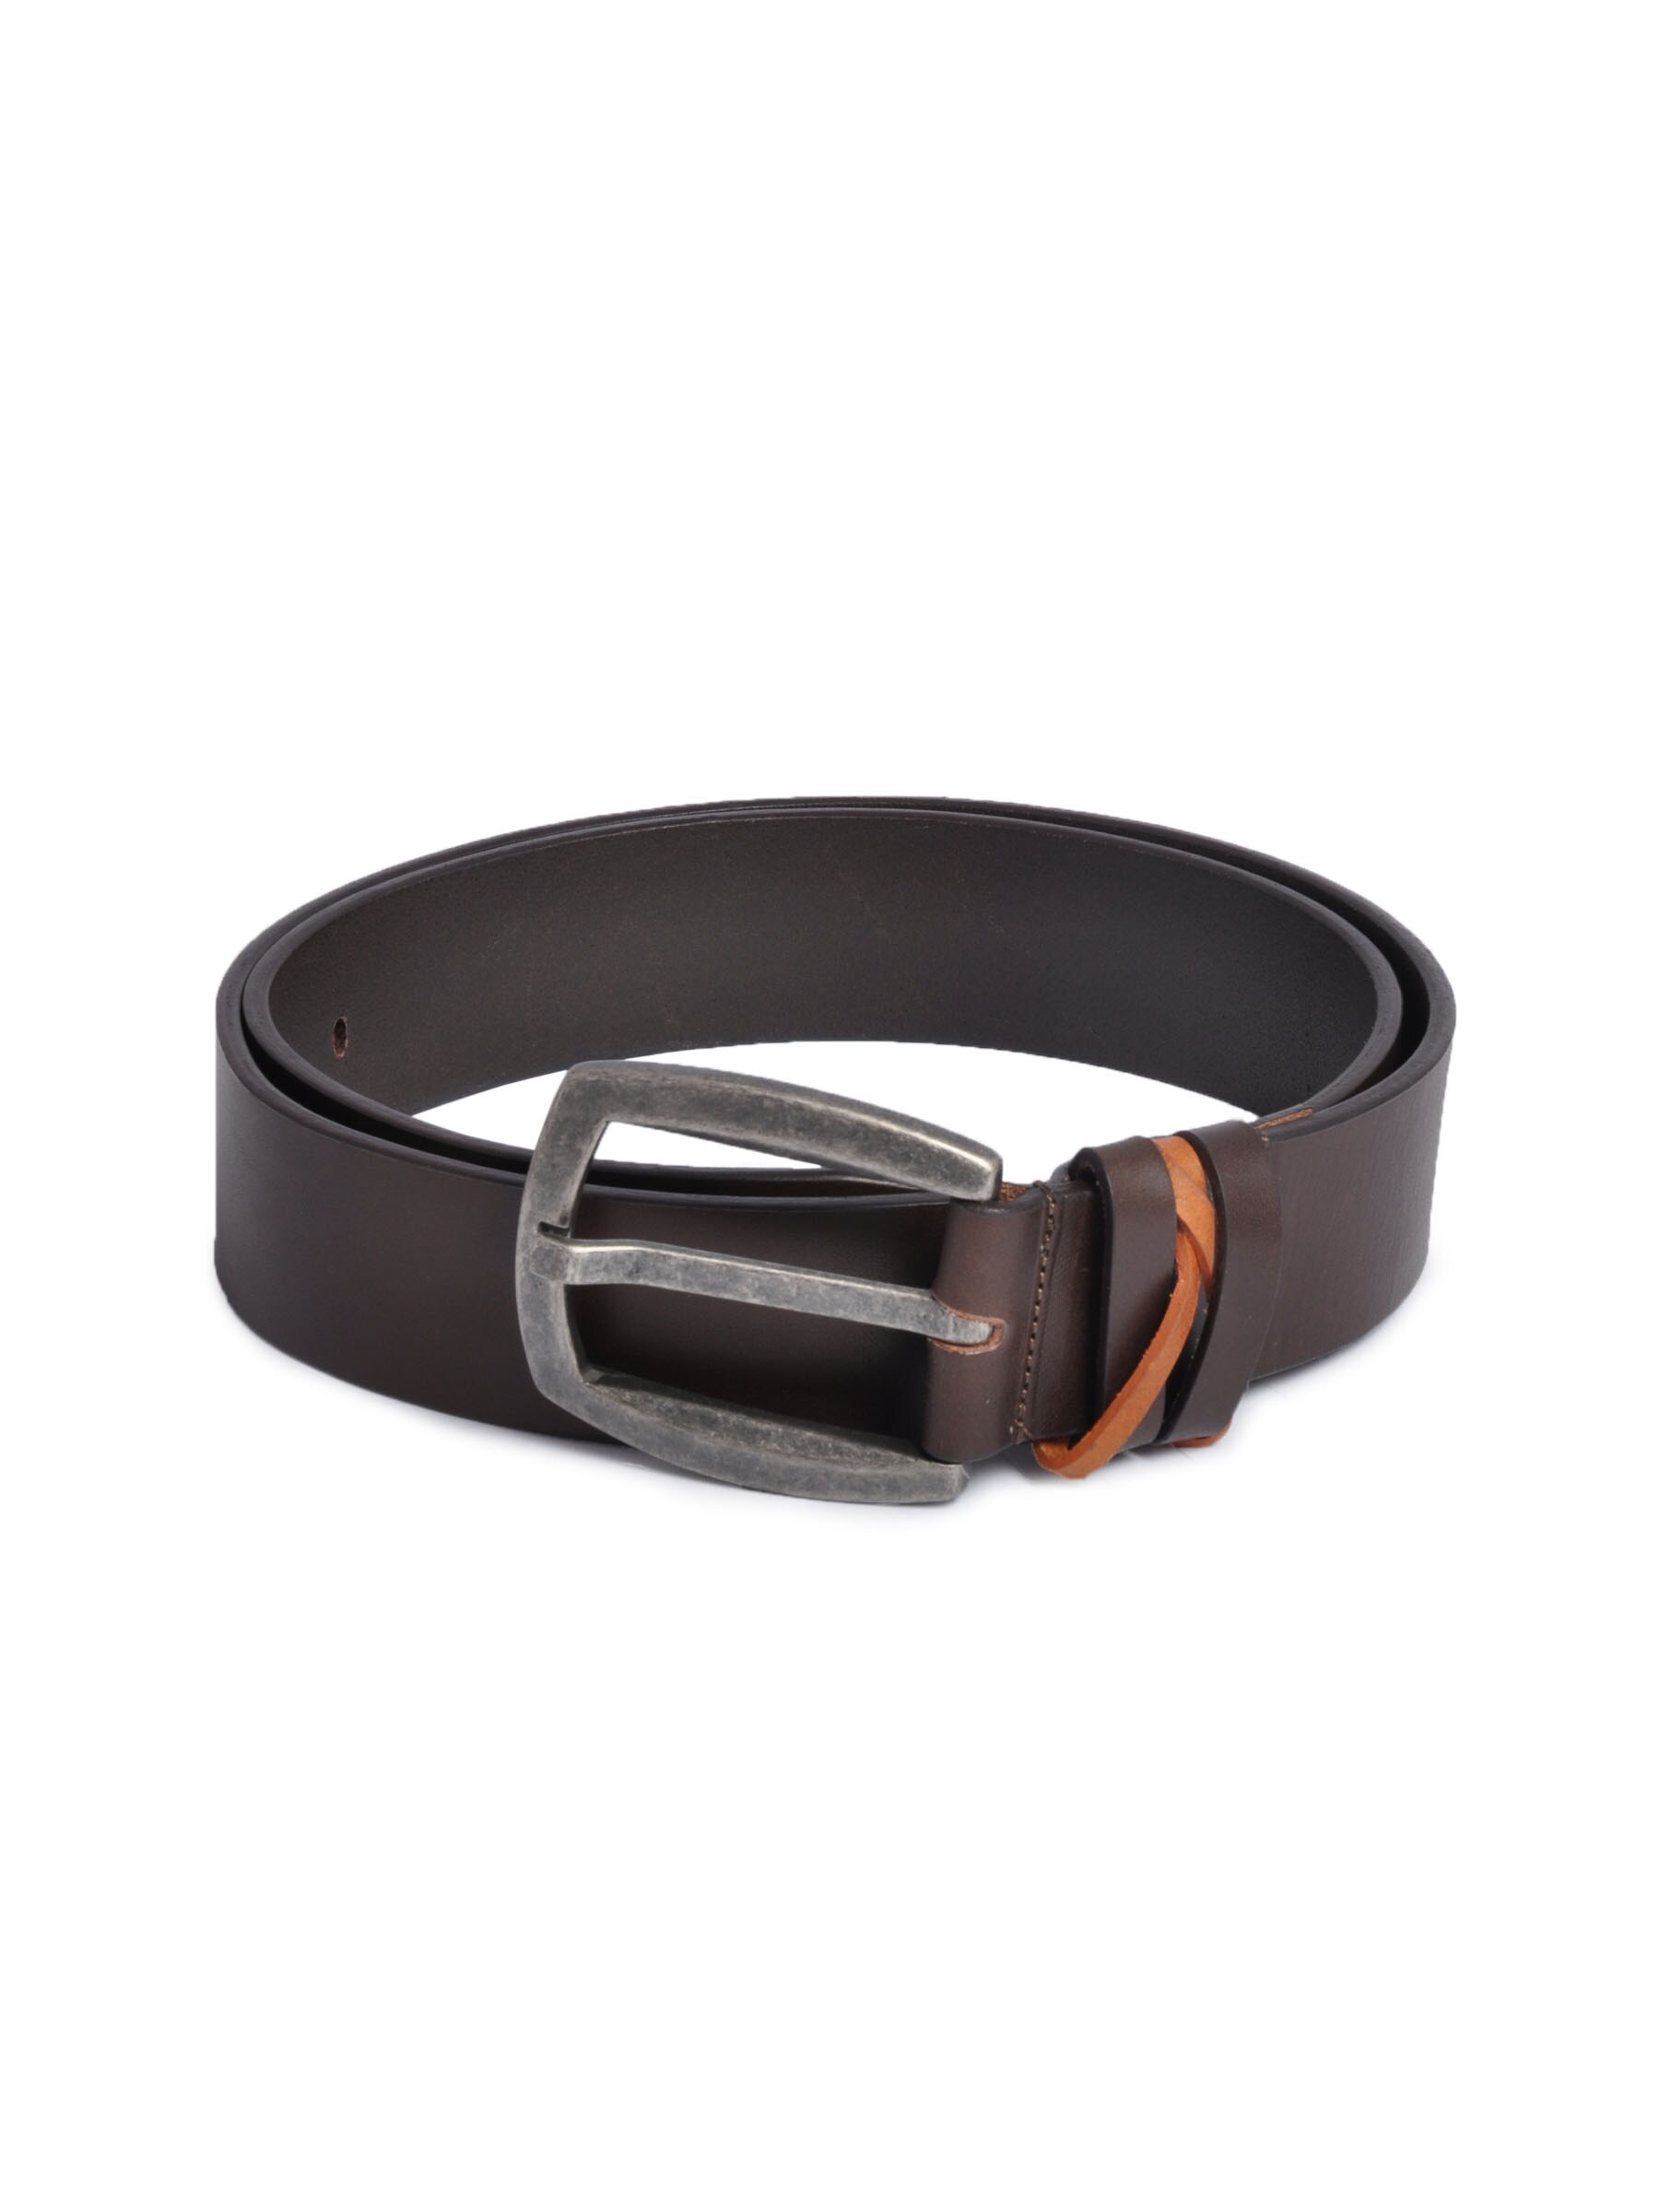 United Colors of Benetton Men Solid Brown Belts